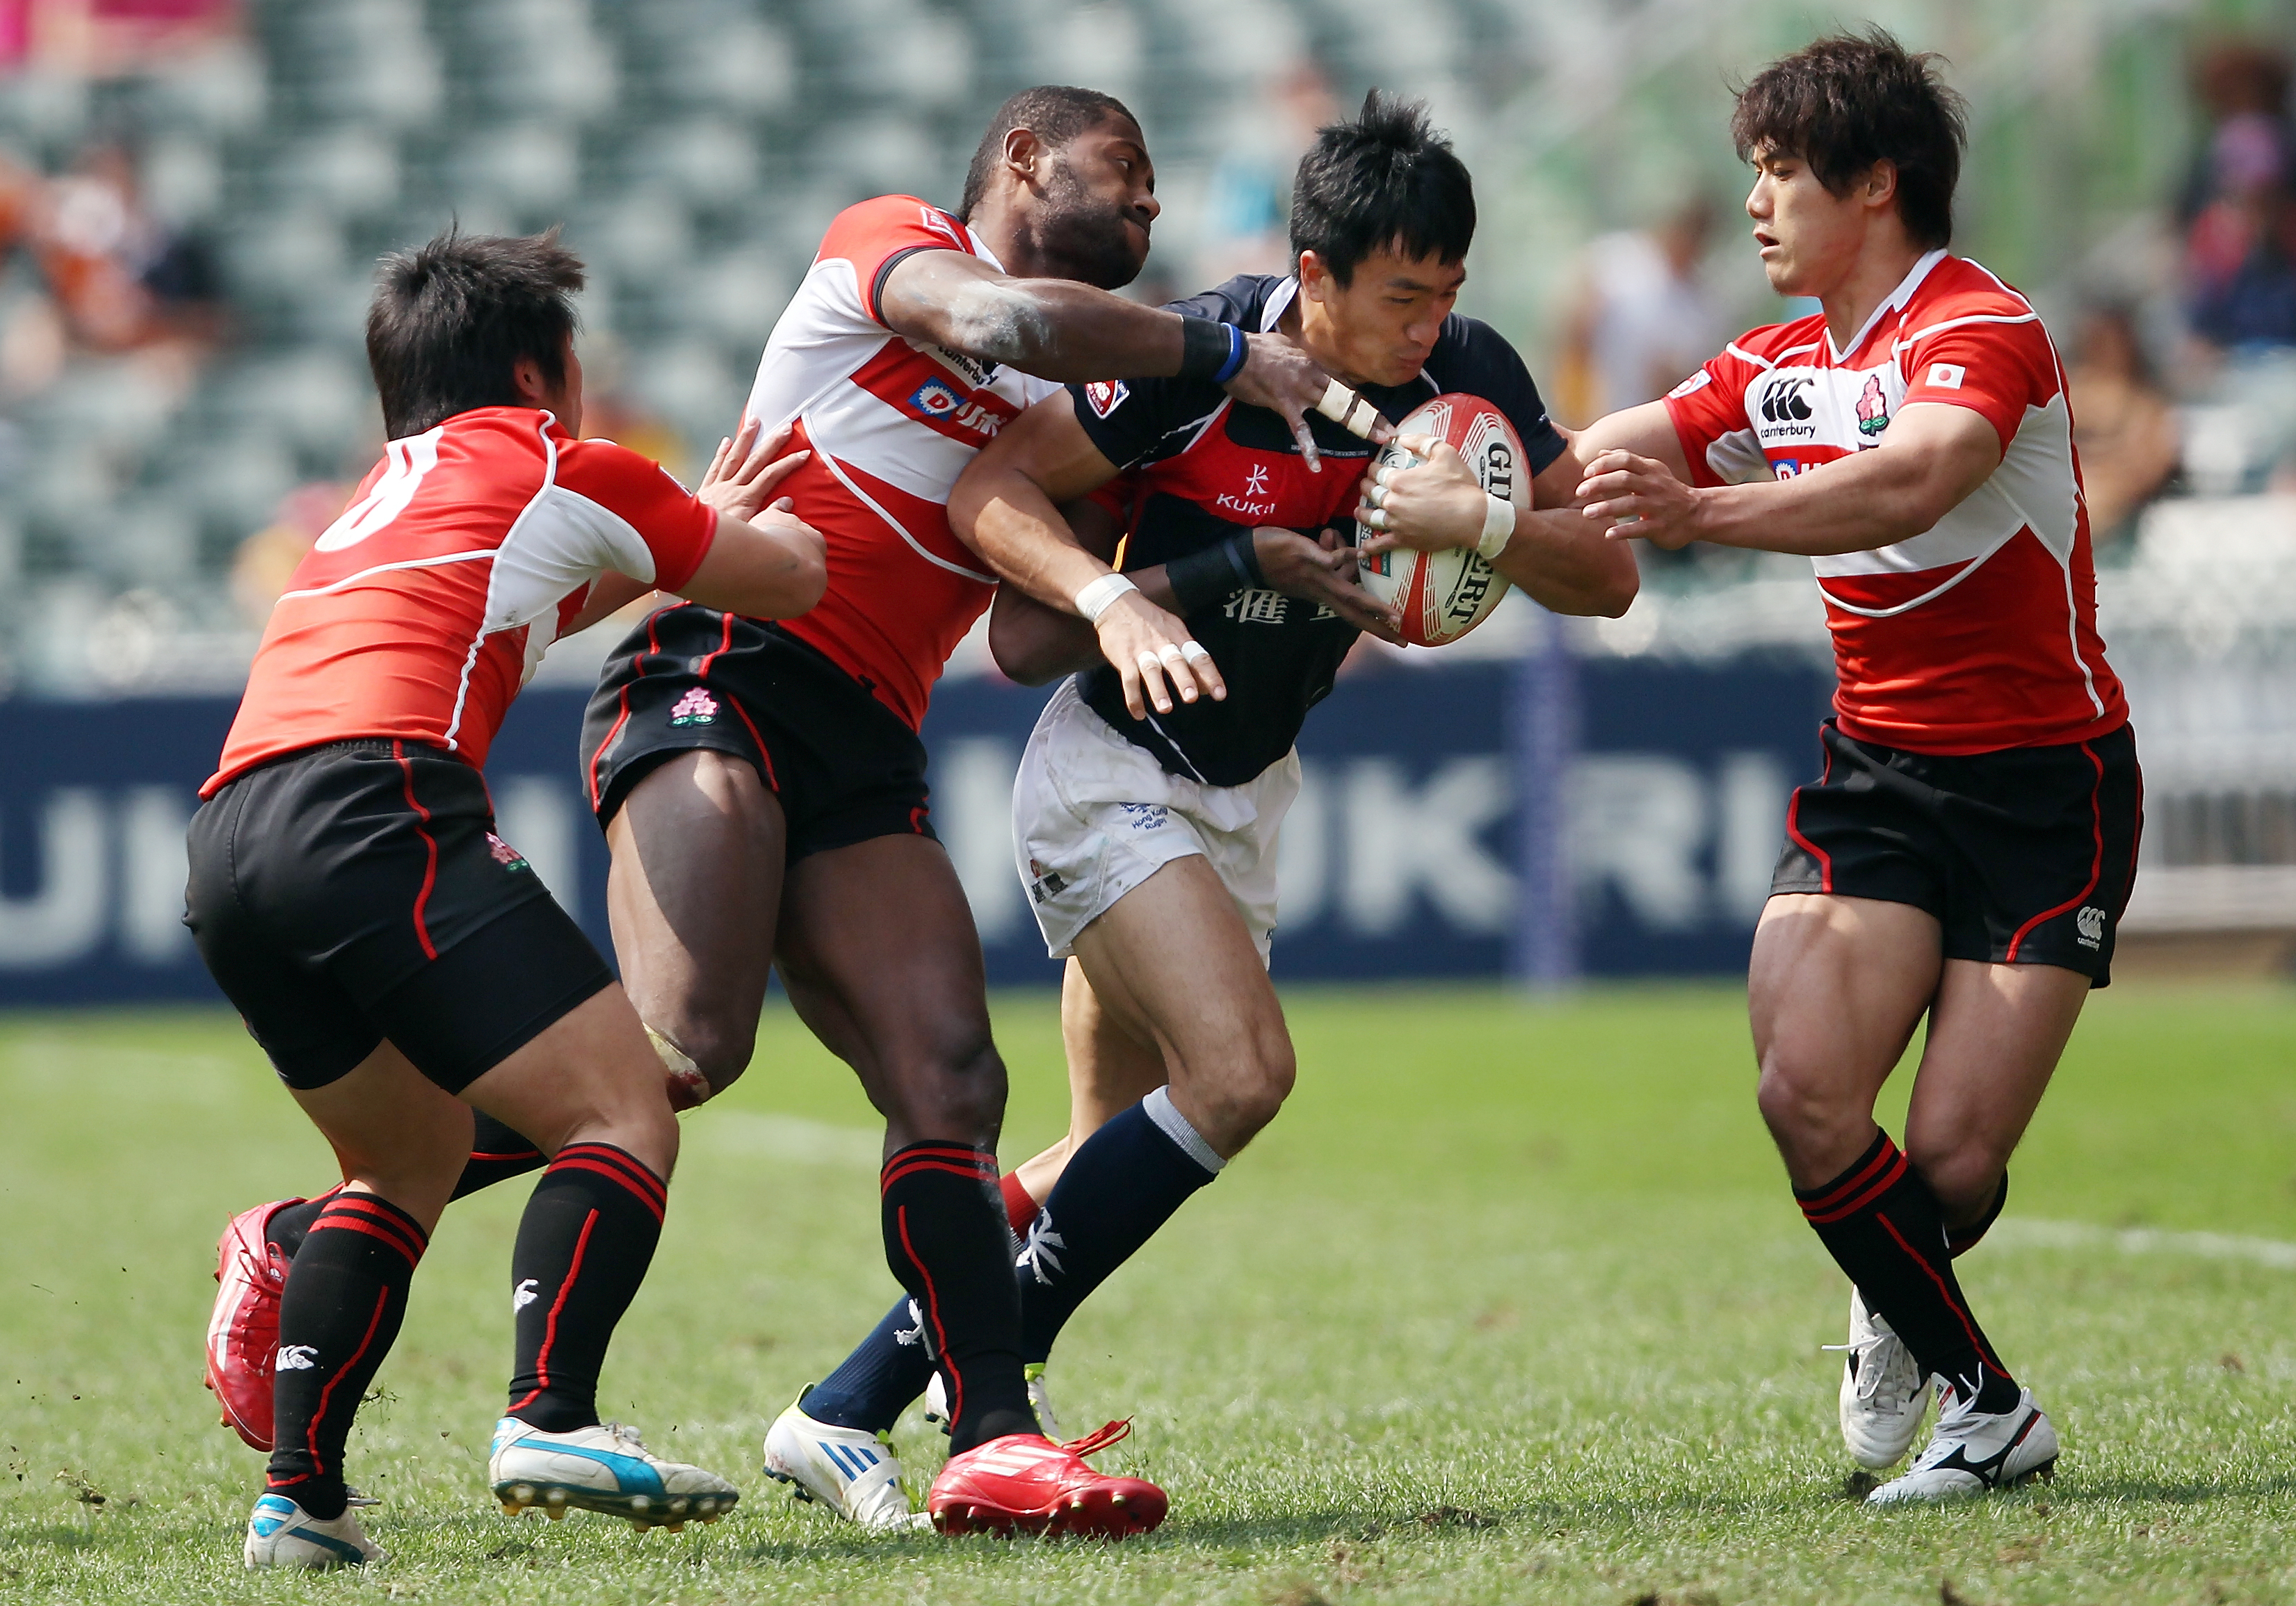 Hong Kong will probably have to overcome nemesis Japan to win the Asian qualifier. Photos: HKRFU